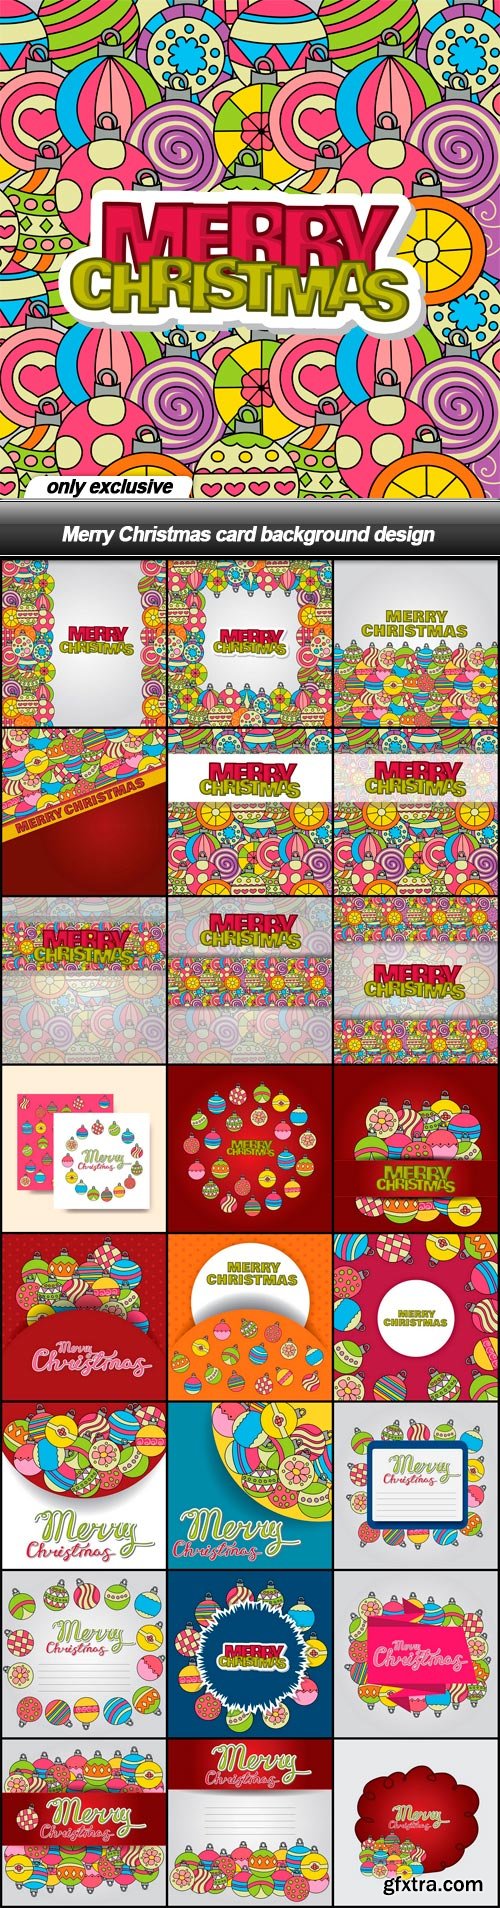 Merry Christmas card background design - 25 EPS